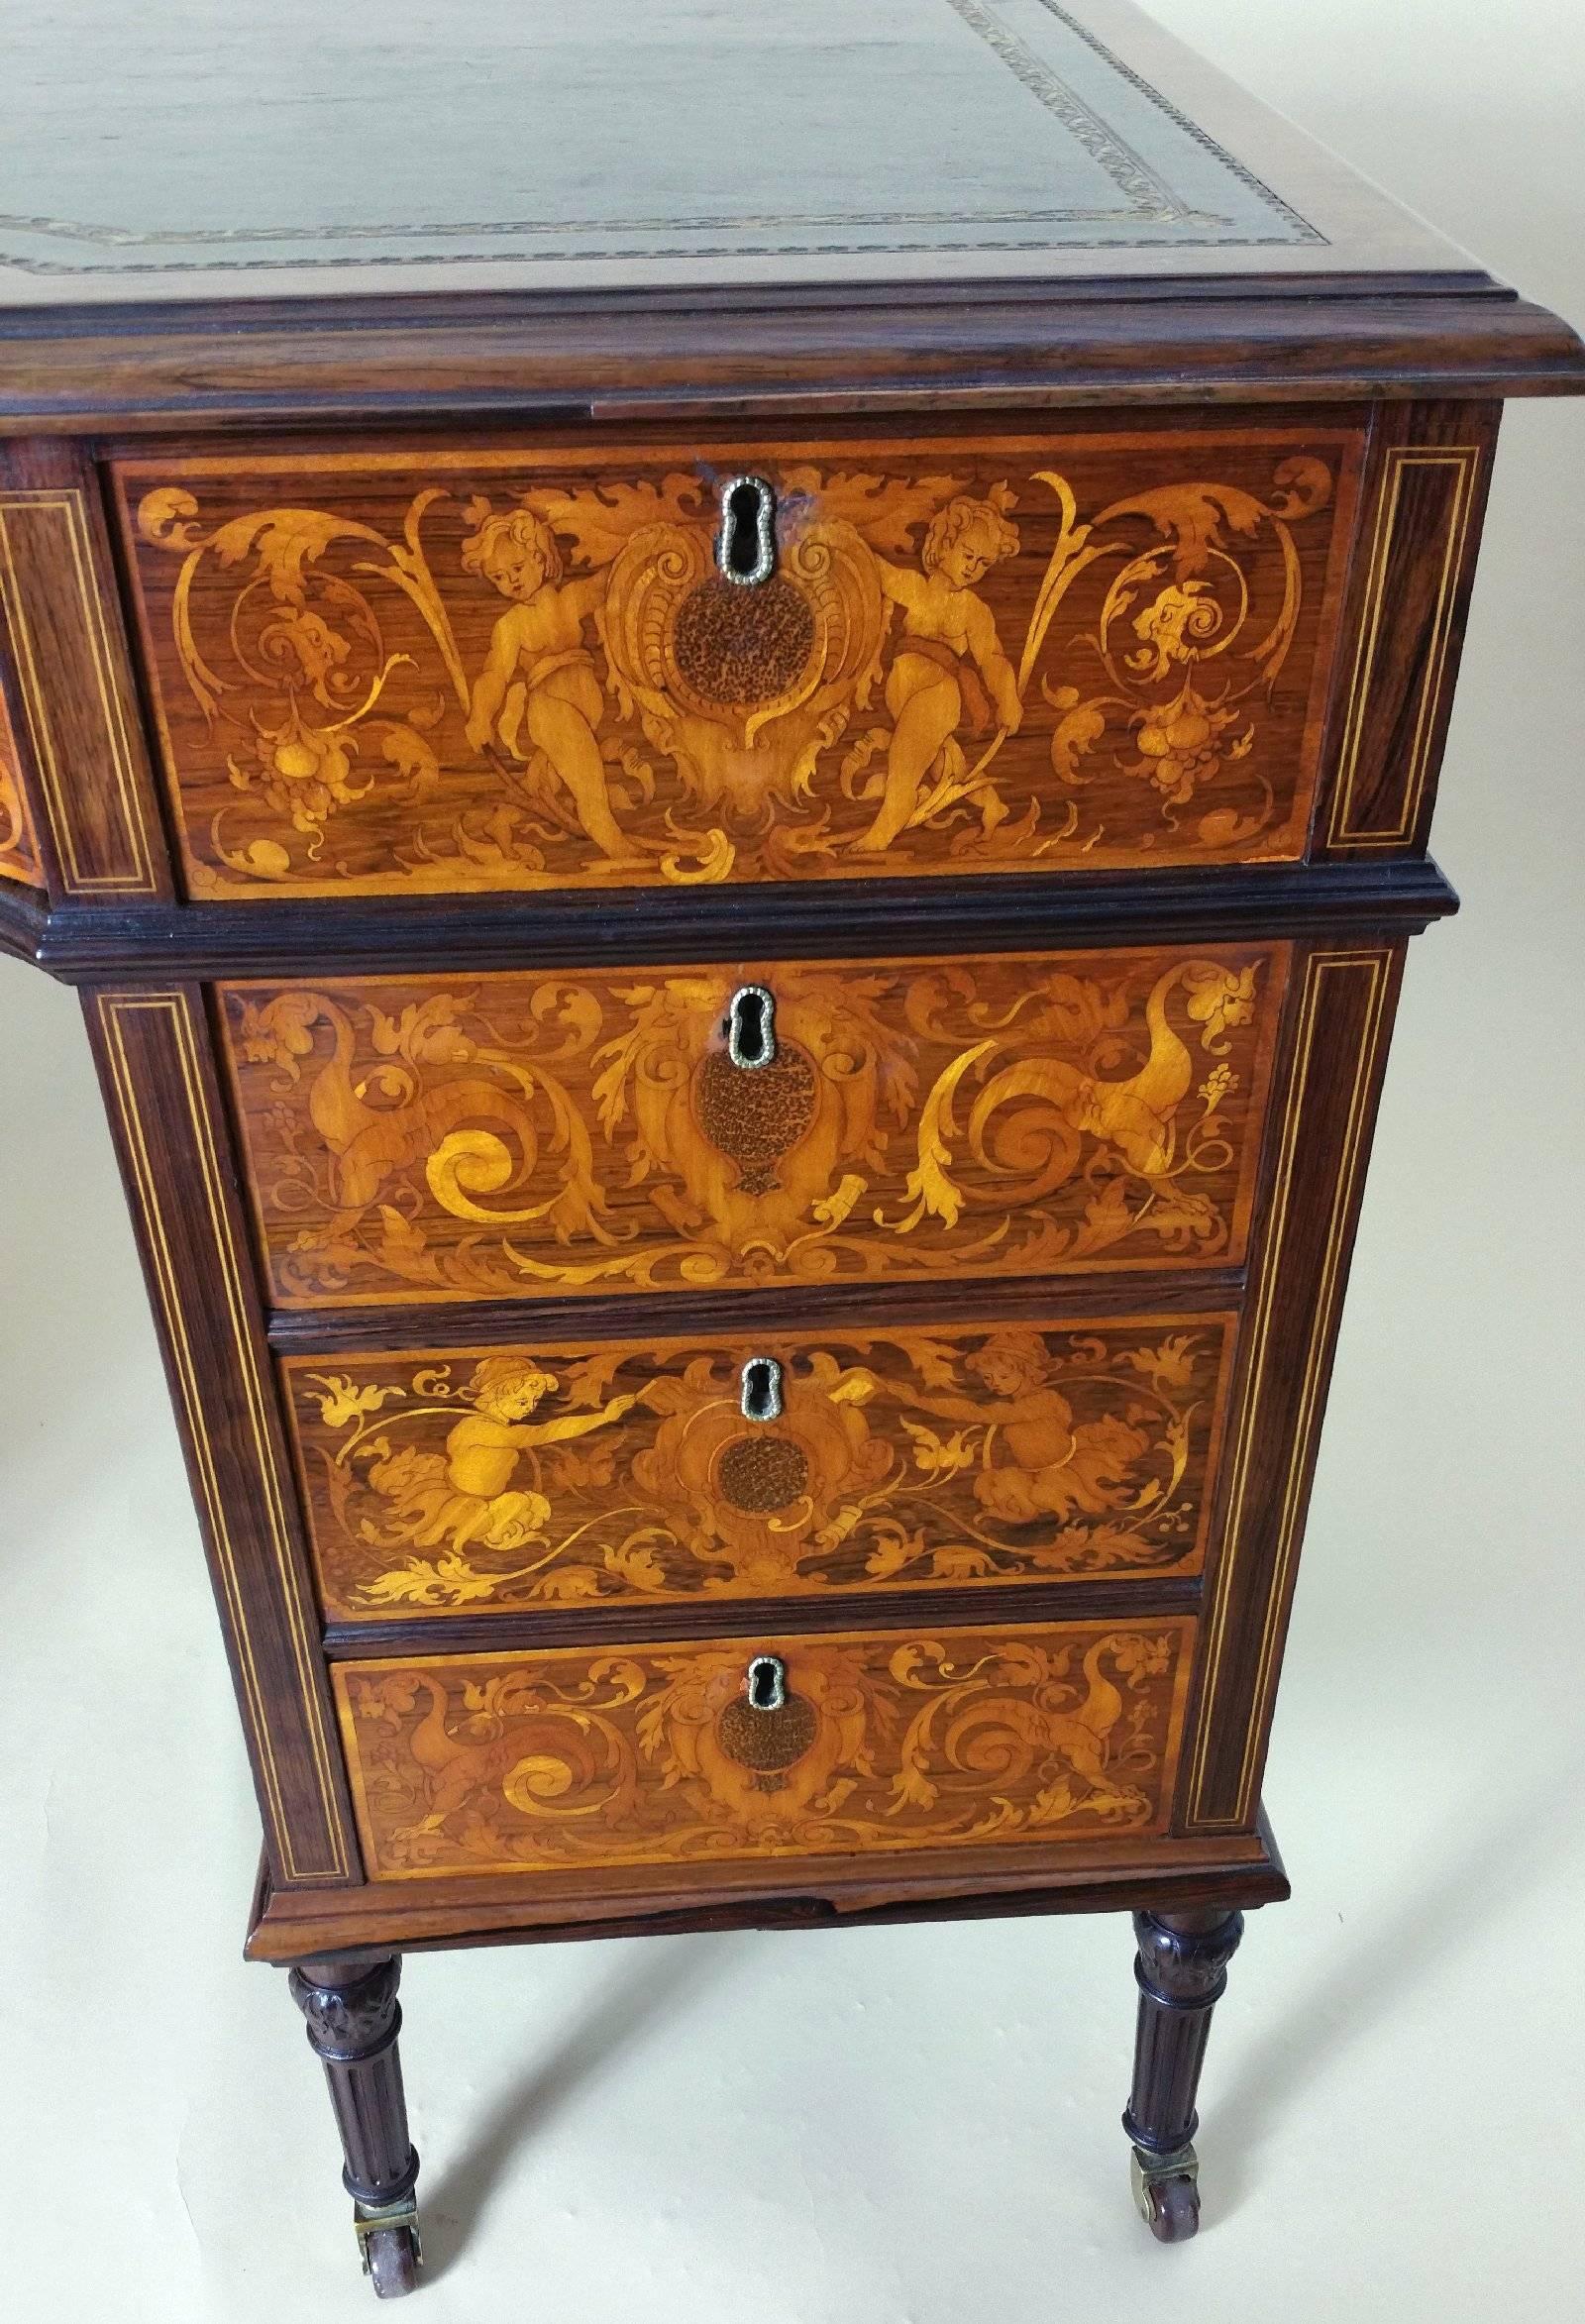 Victorian Marquetry Inlaid Rosewood Shaped Front Kneehole Desk In Excellent Condition In London, west Sussex